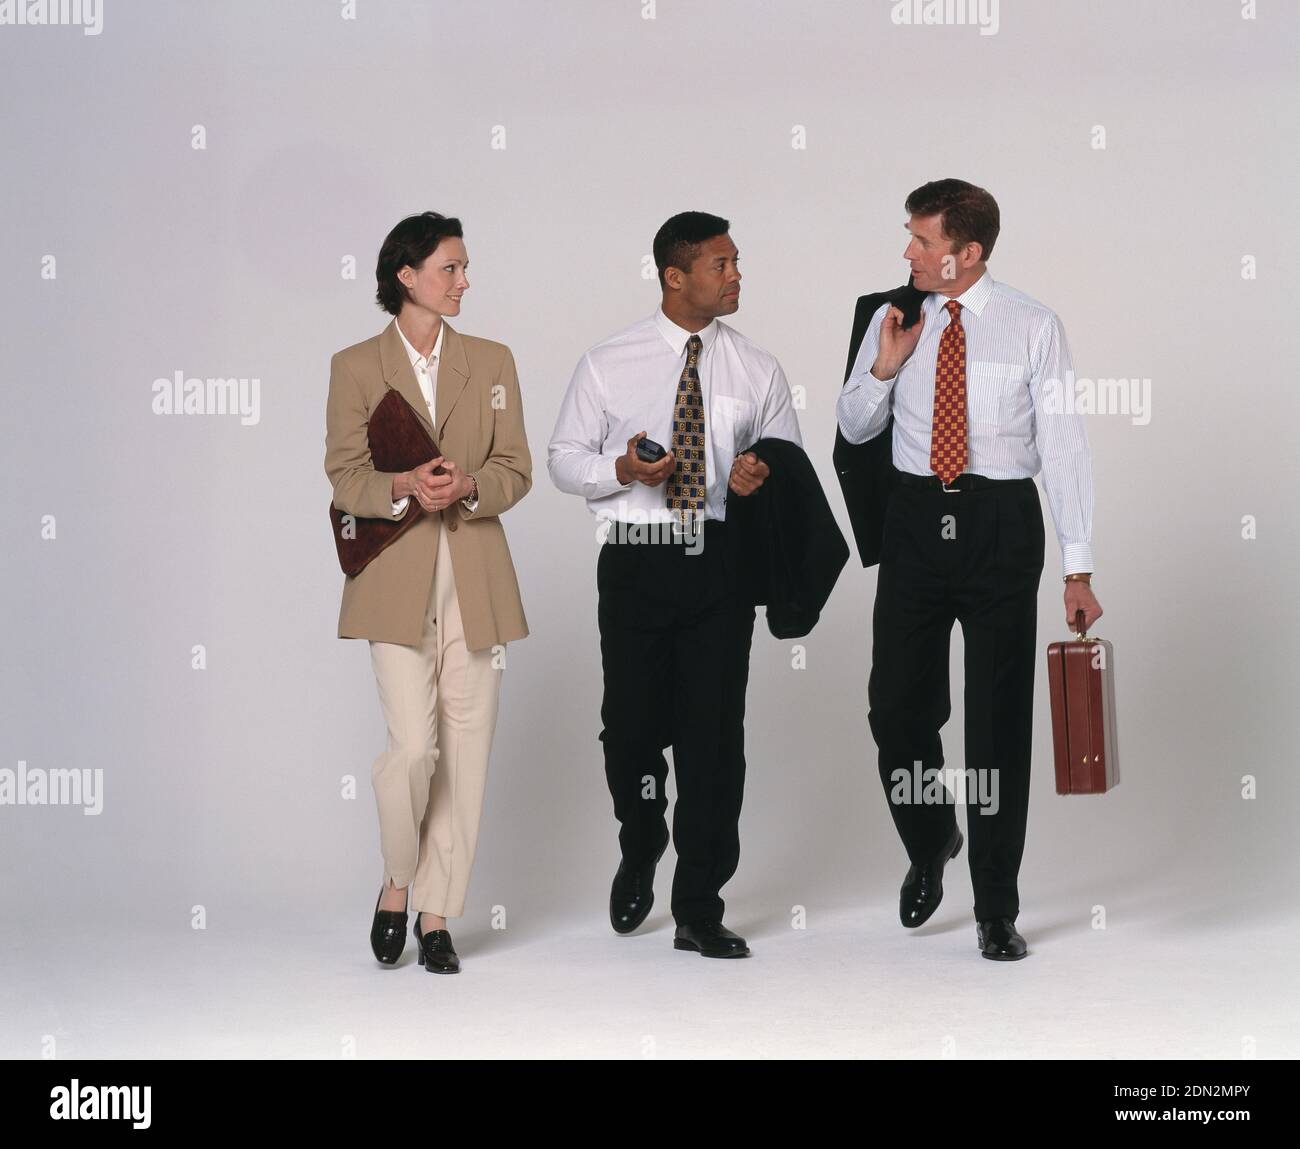 Full length view of three business executives walking. Stock Photo